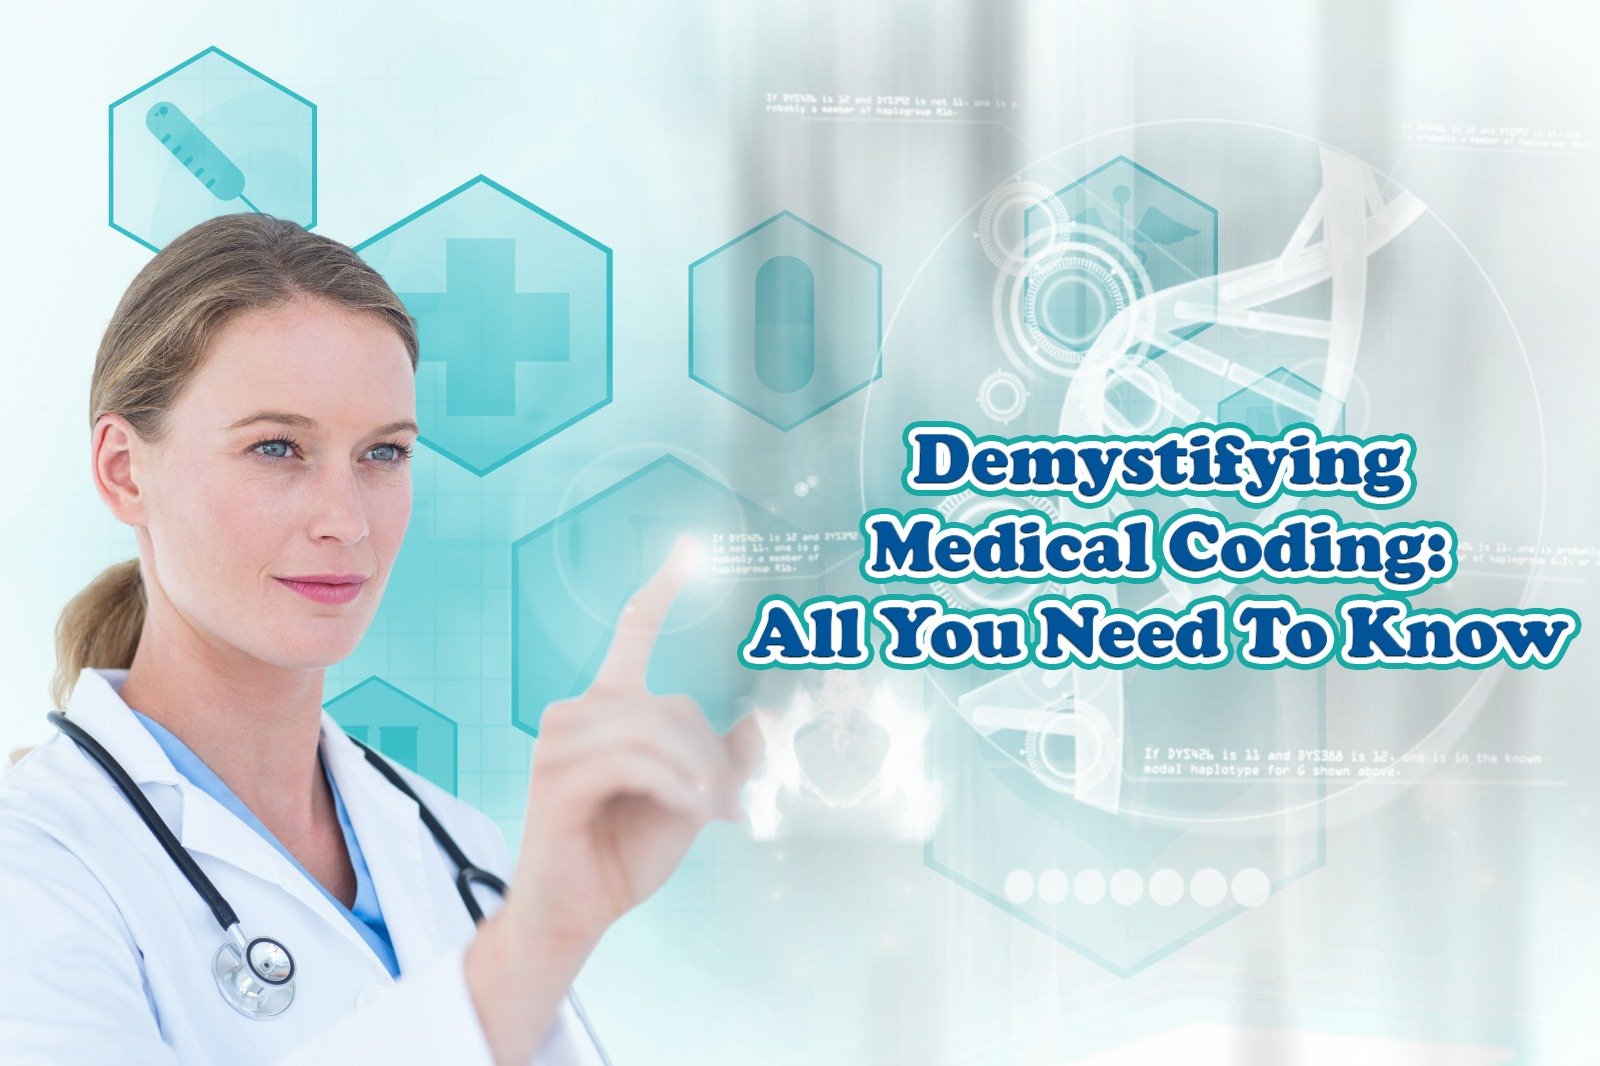 Demystifying Medical Coding: All You Need to Know